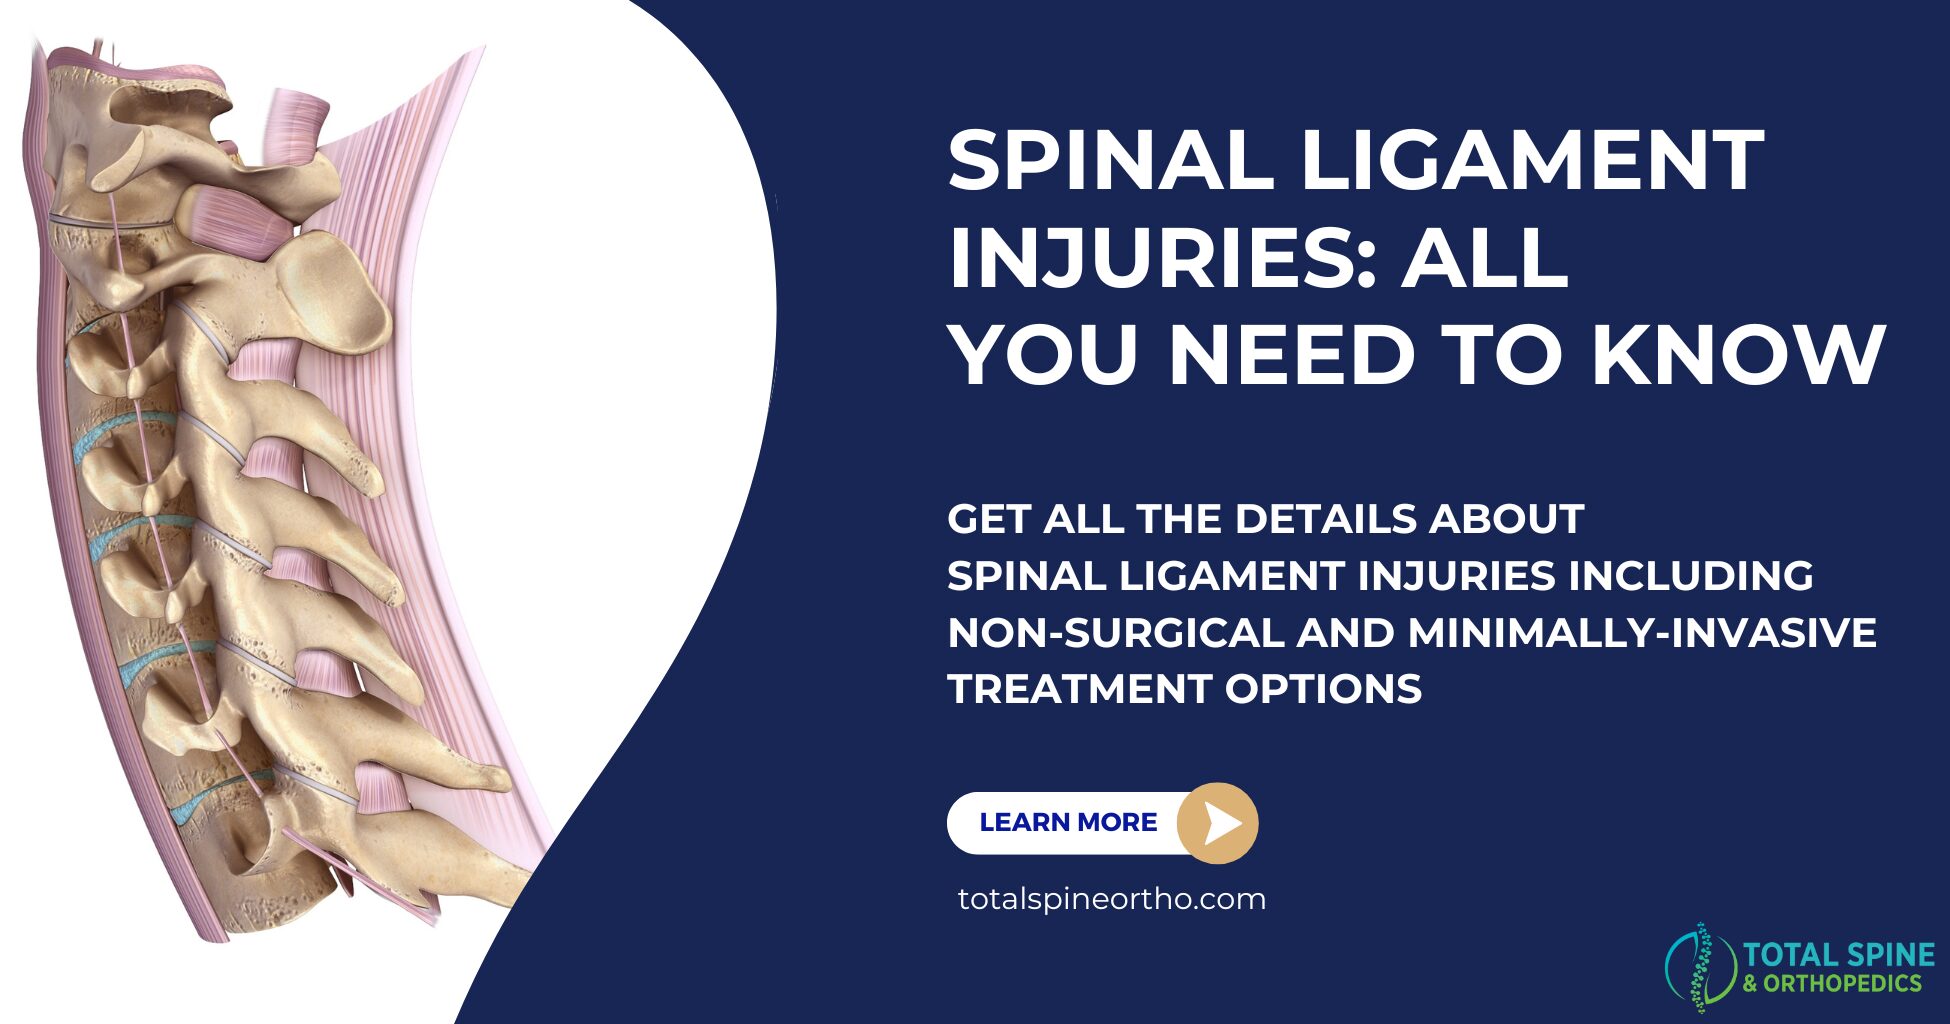 An information plaque about spinal ligament injuries.